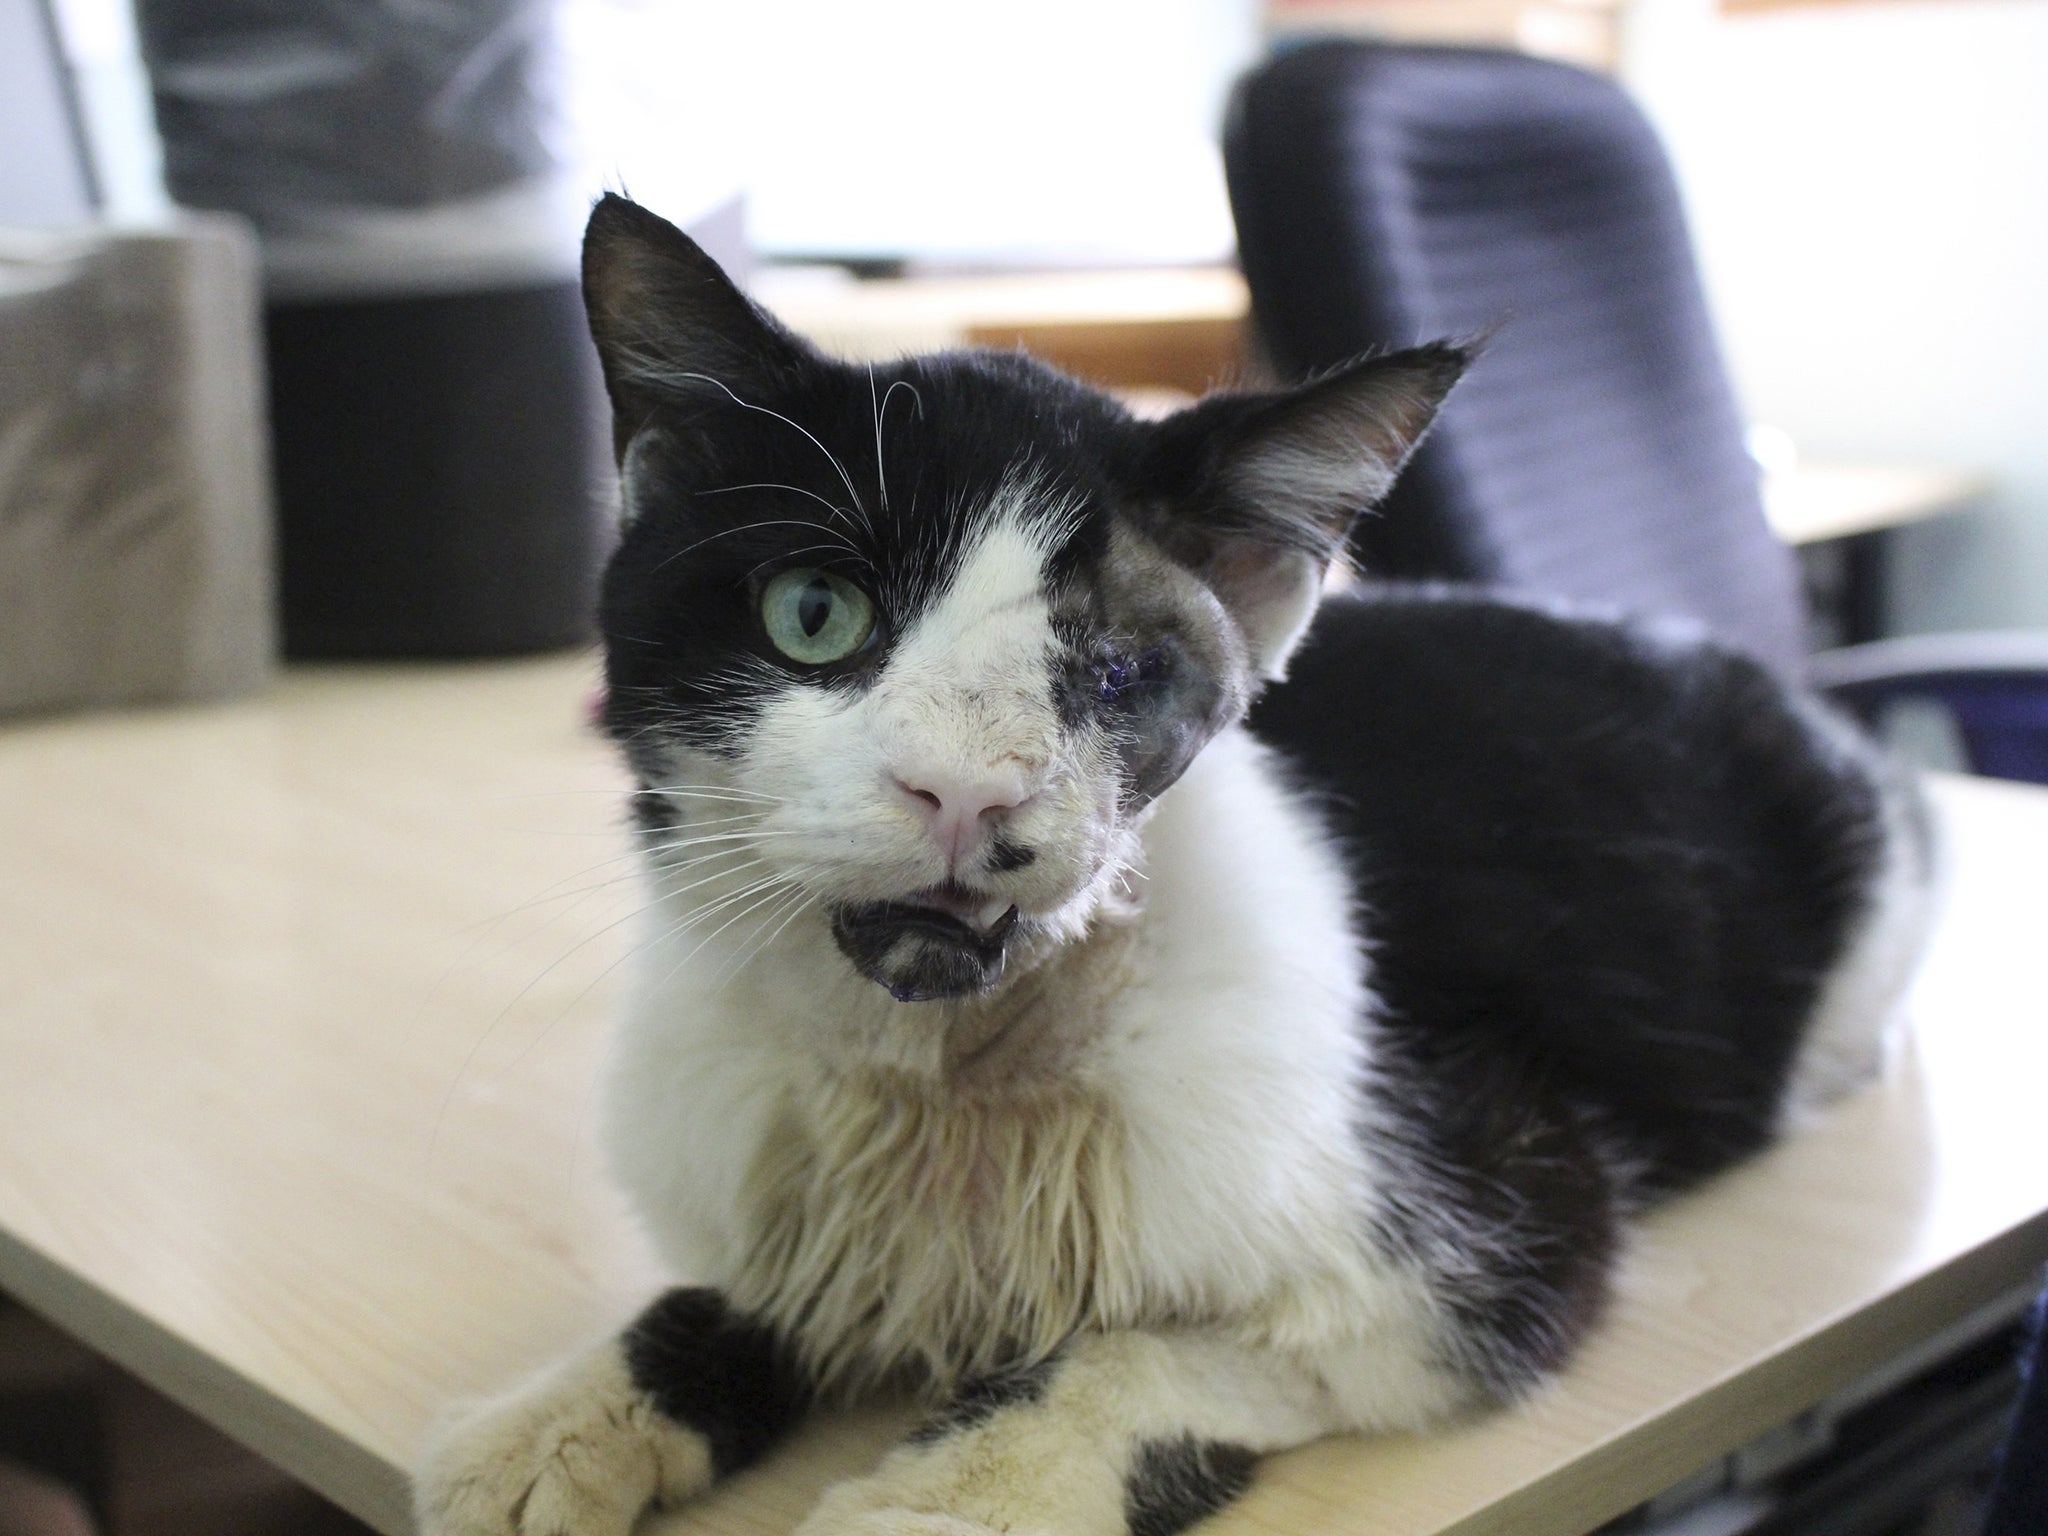 Ugly custody battle for Bart the 'zombie' cat that rose from the grave